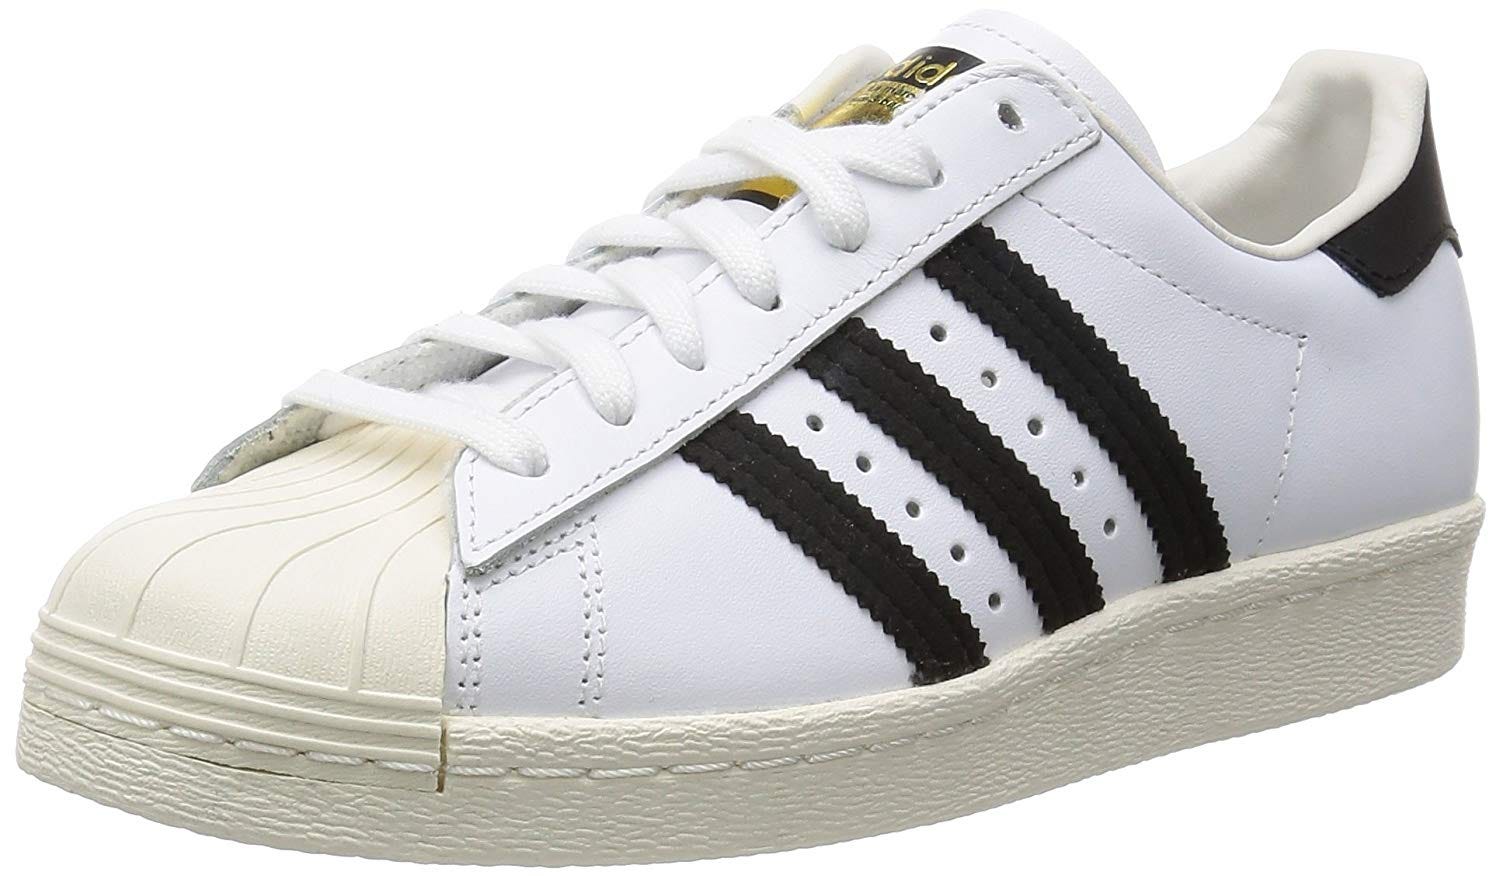 The Adidas Superstar: Still Funky After All These Years